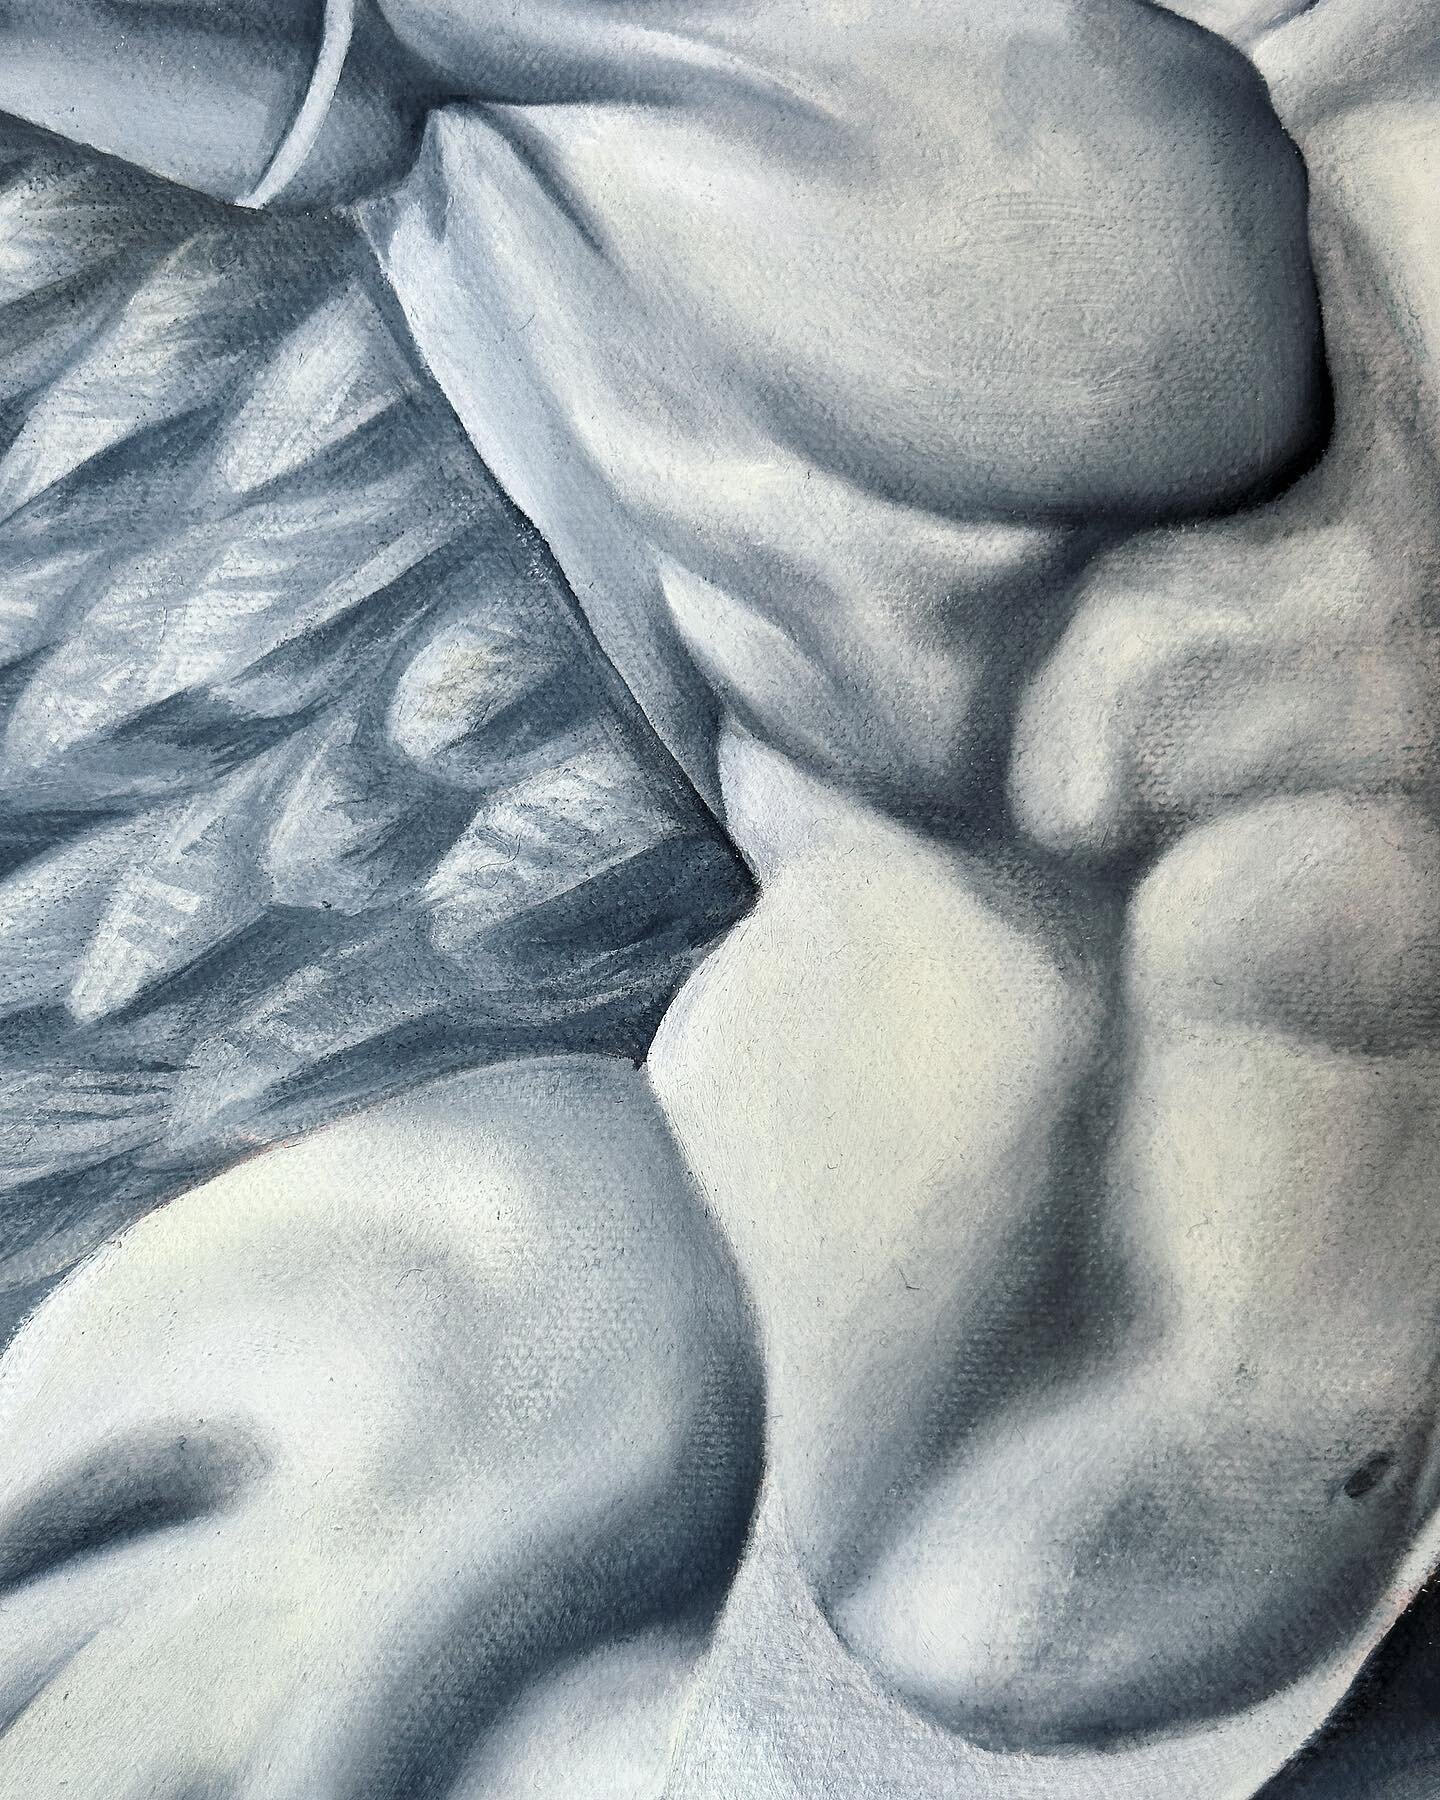 Closeup of a piece I&rsquo;ve been working on for over a year&hellip;. Oil painting is slow going but I&rsquo;ve promised myself it&rsquo;ll be done before the end of August 😅

&ldquo;Icarus&rdquo; 30 x 40, Oil on Canvas 
 
&bull;
&bull;
&bull;
&bul